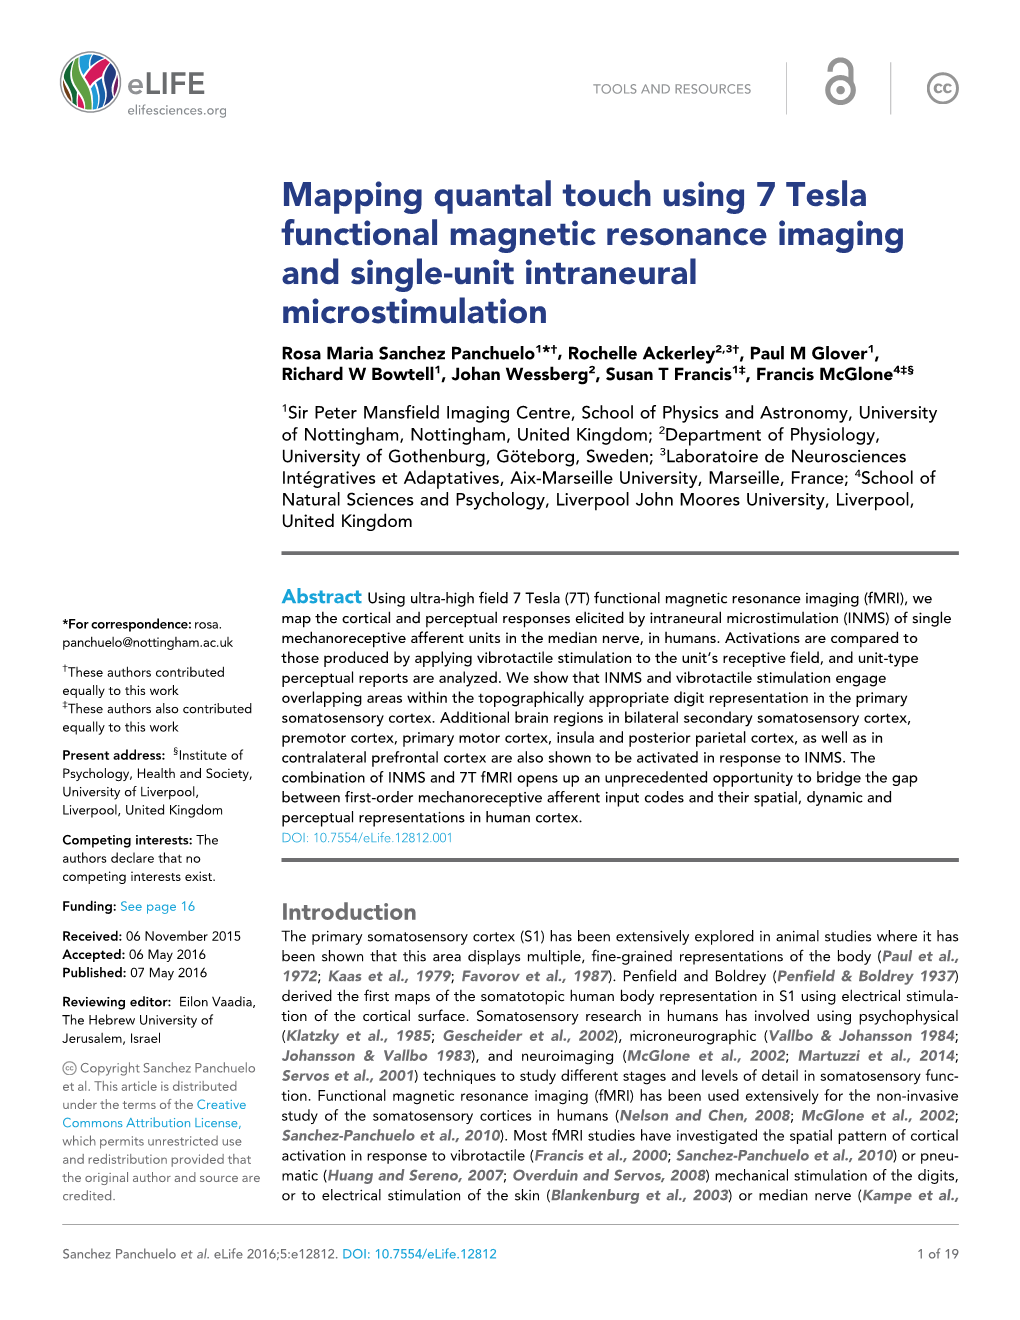 Mapping Quantal Touch Using 7 Tesla Functional Magnetic Resonance Imaging and Single-Unit Intraneural Microstimulation